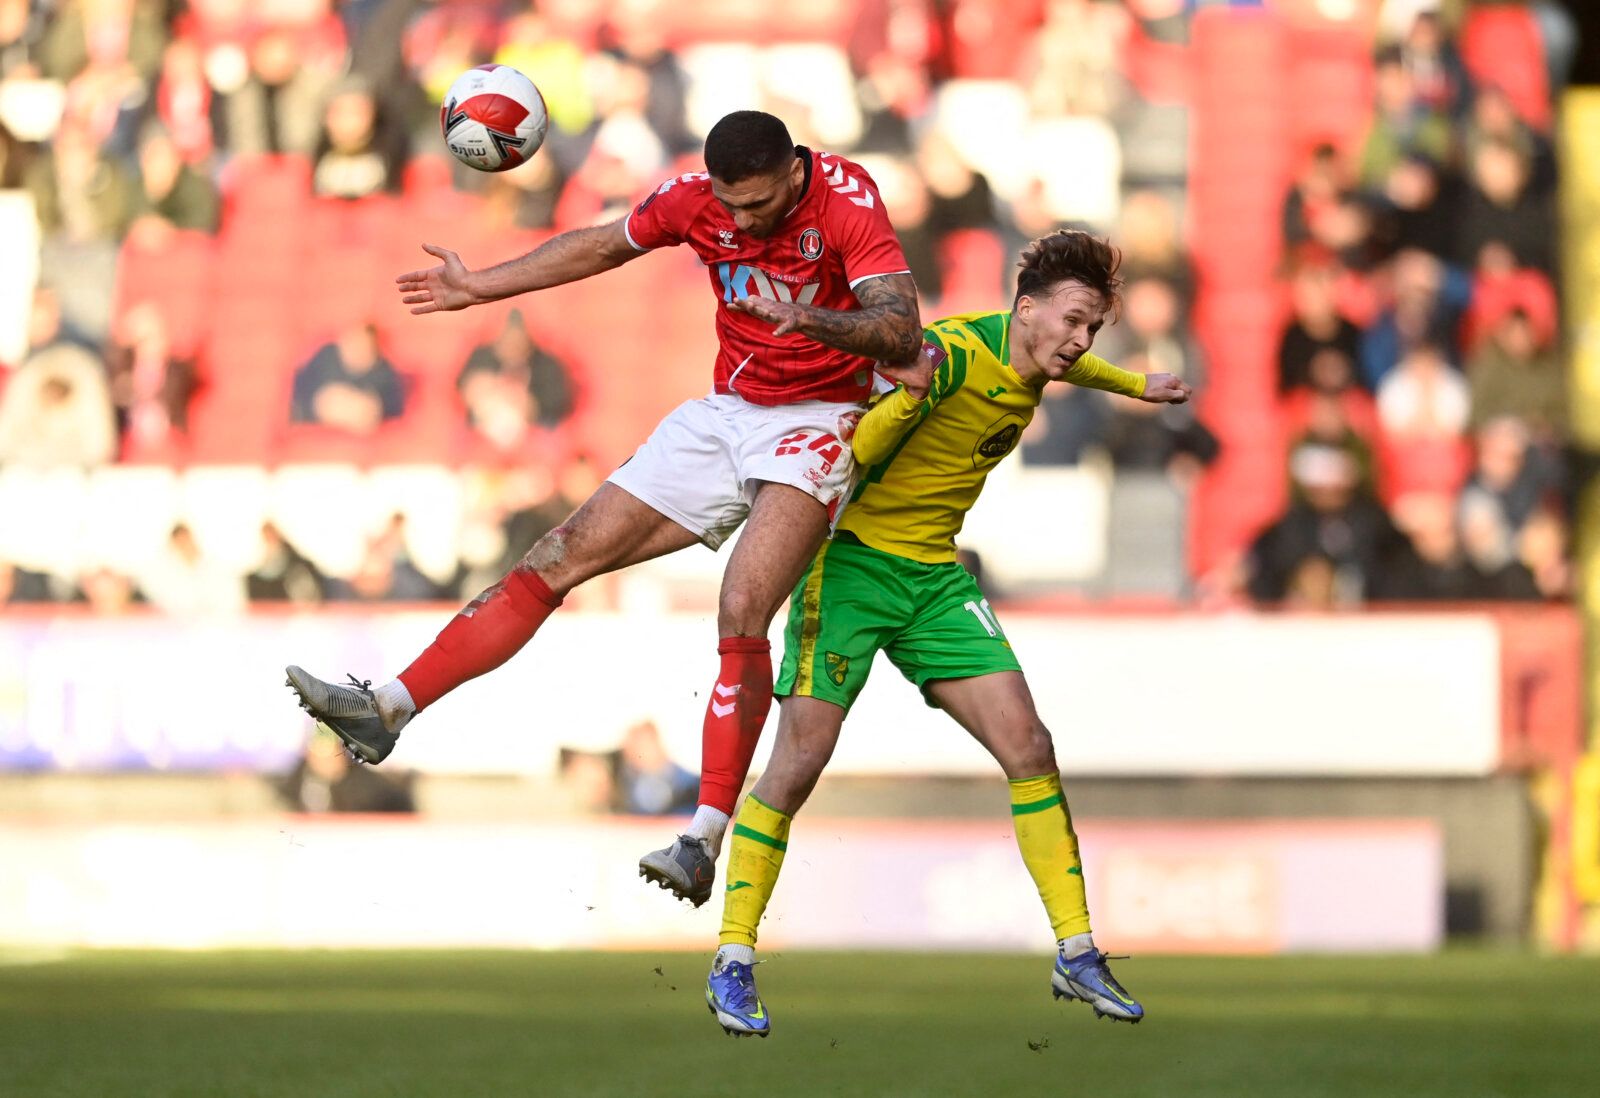 Soccer Football - FA Cup Third Round - Charlton Athletic v Norwich City - The Valley, London, Britain - January 9, 2022 Charlton Athletic's Ryan Inniss in action with Norwich City's Kieran Dowell REUTERS/Tony Obrien